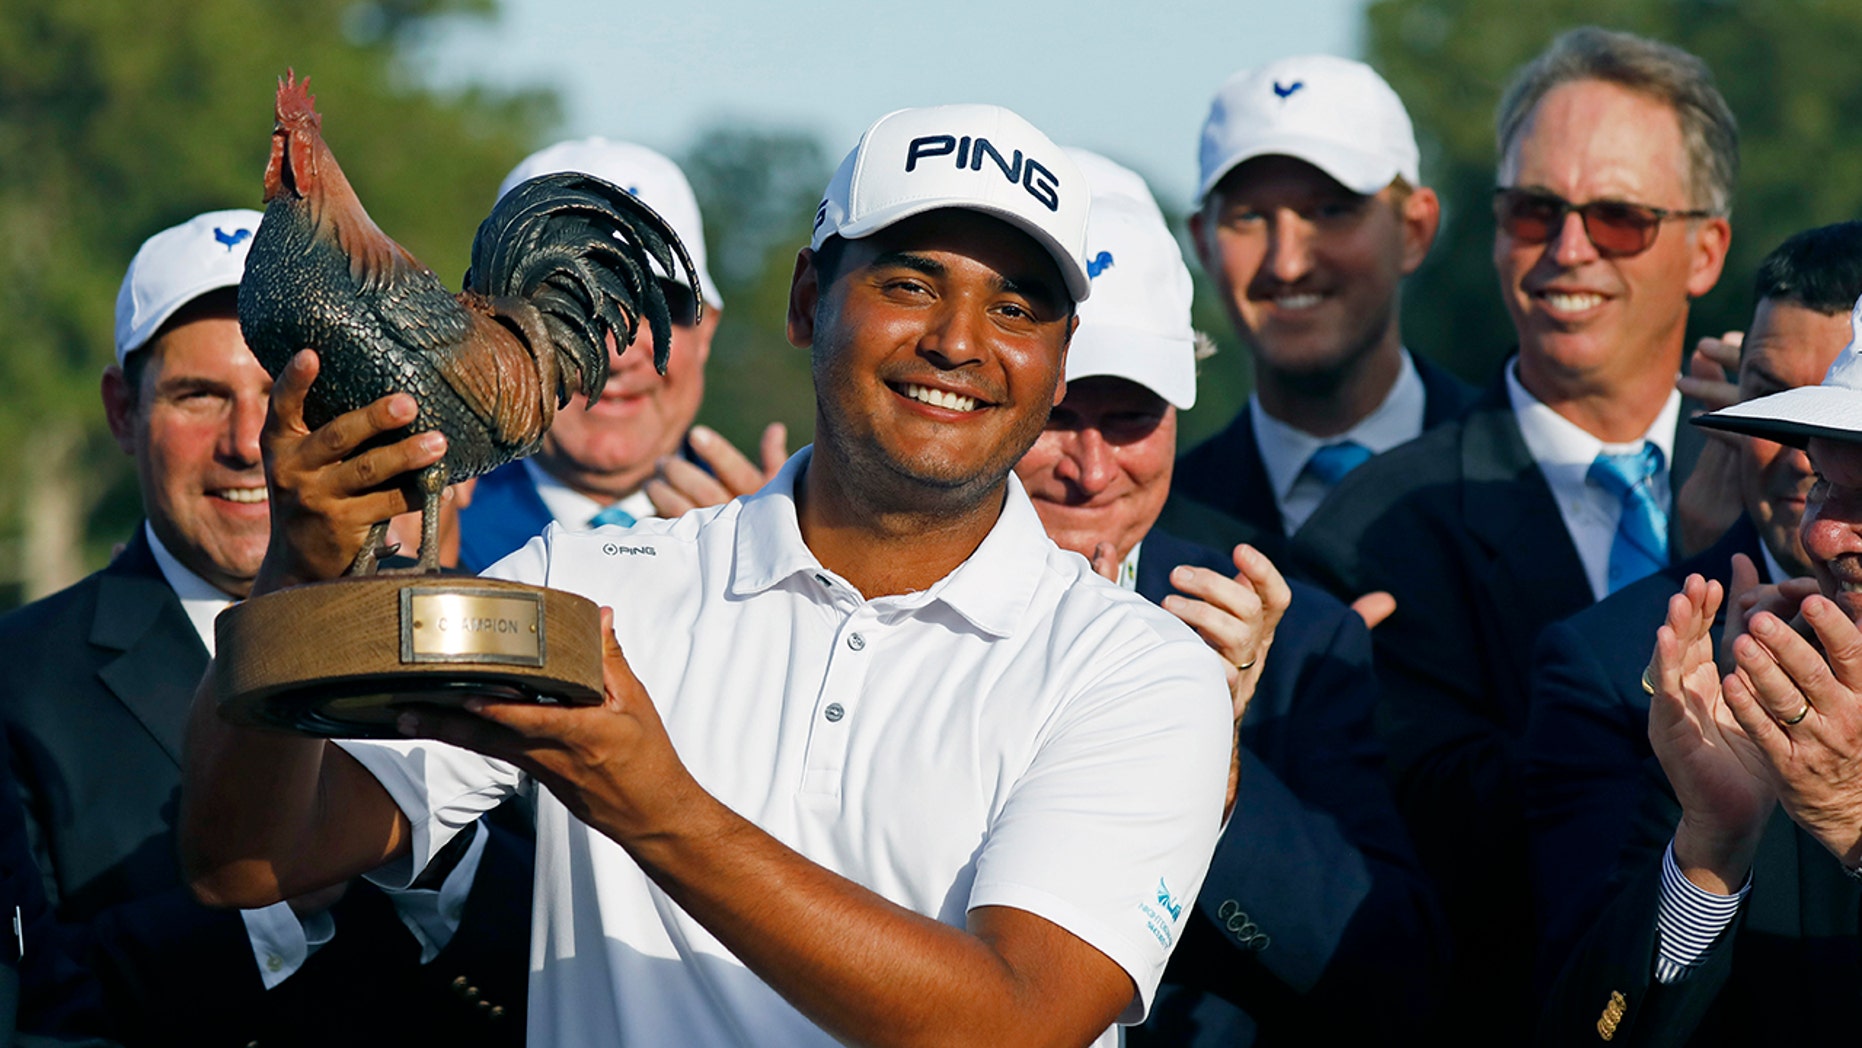 Sebastian Munoz, of Colombia, hoists the trophy after winning the Sanderson Farms Championship golf tournament in Jackson, Miss., Sunday, Sept. 22, 2019. (AP Photo/Rogelio V. Solis)